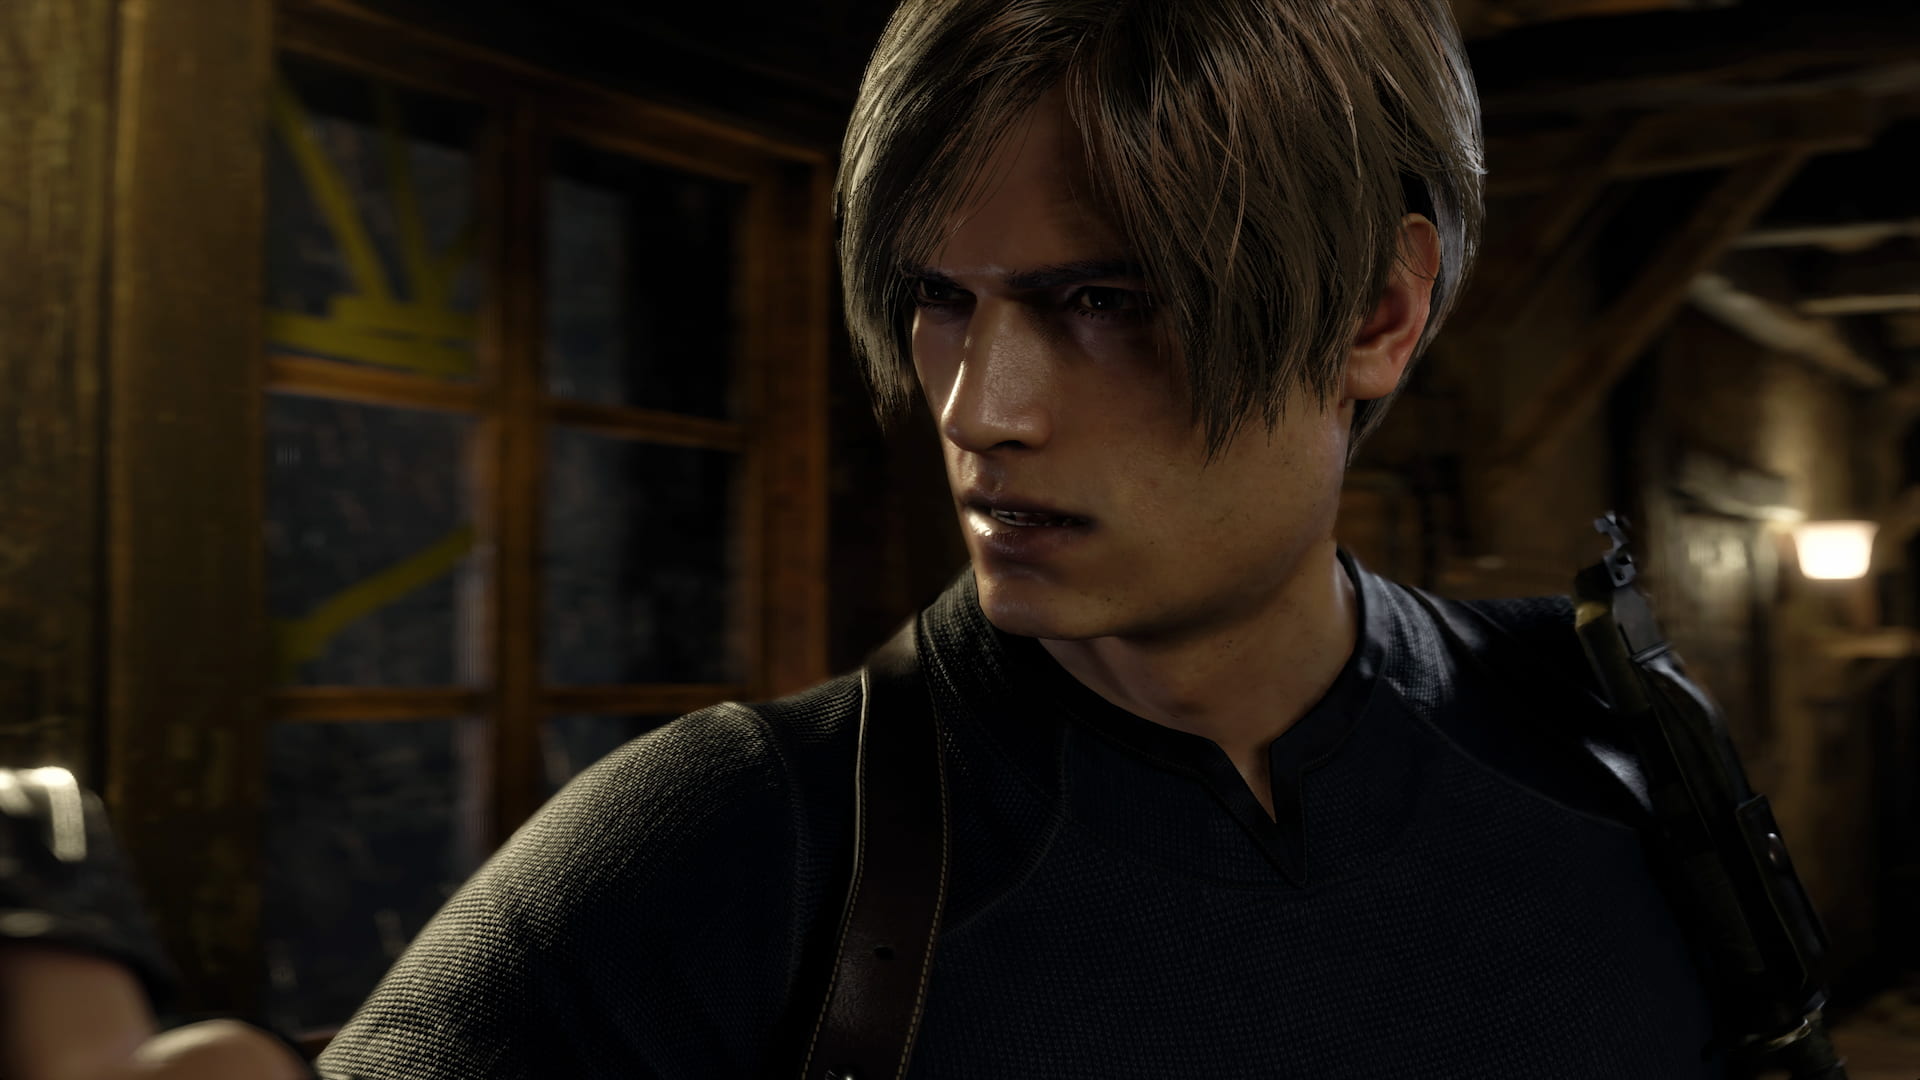 Is Resident Evil 4 Remake on Game Pass?